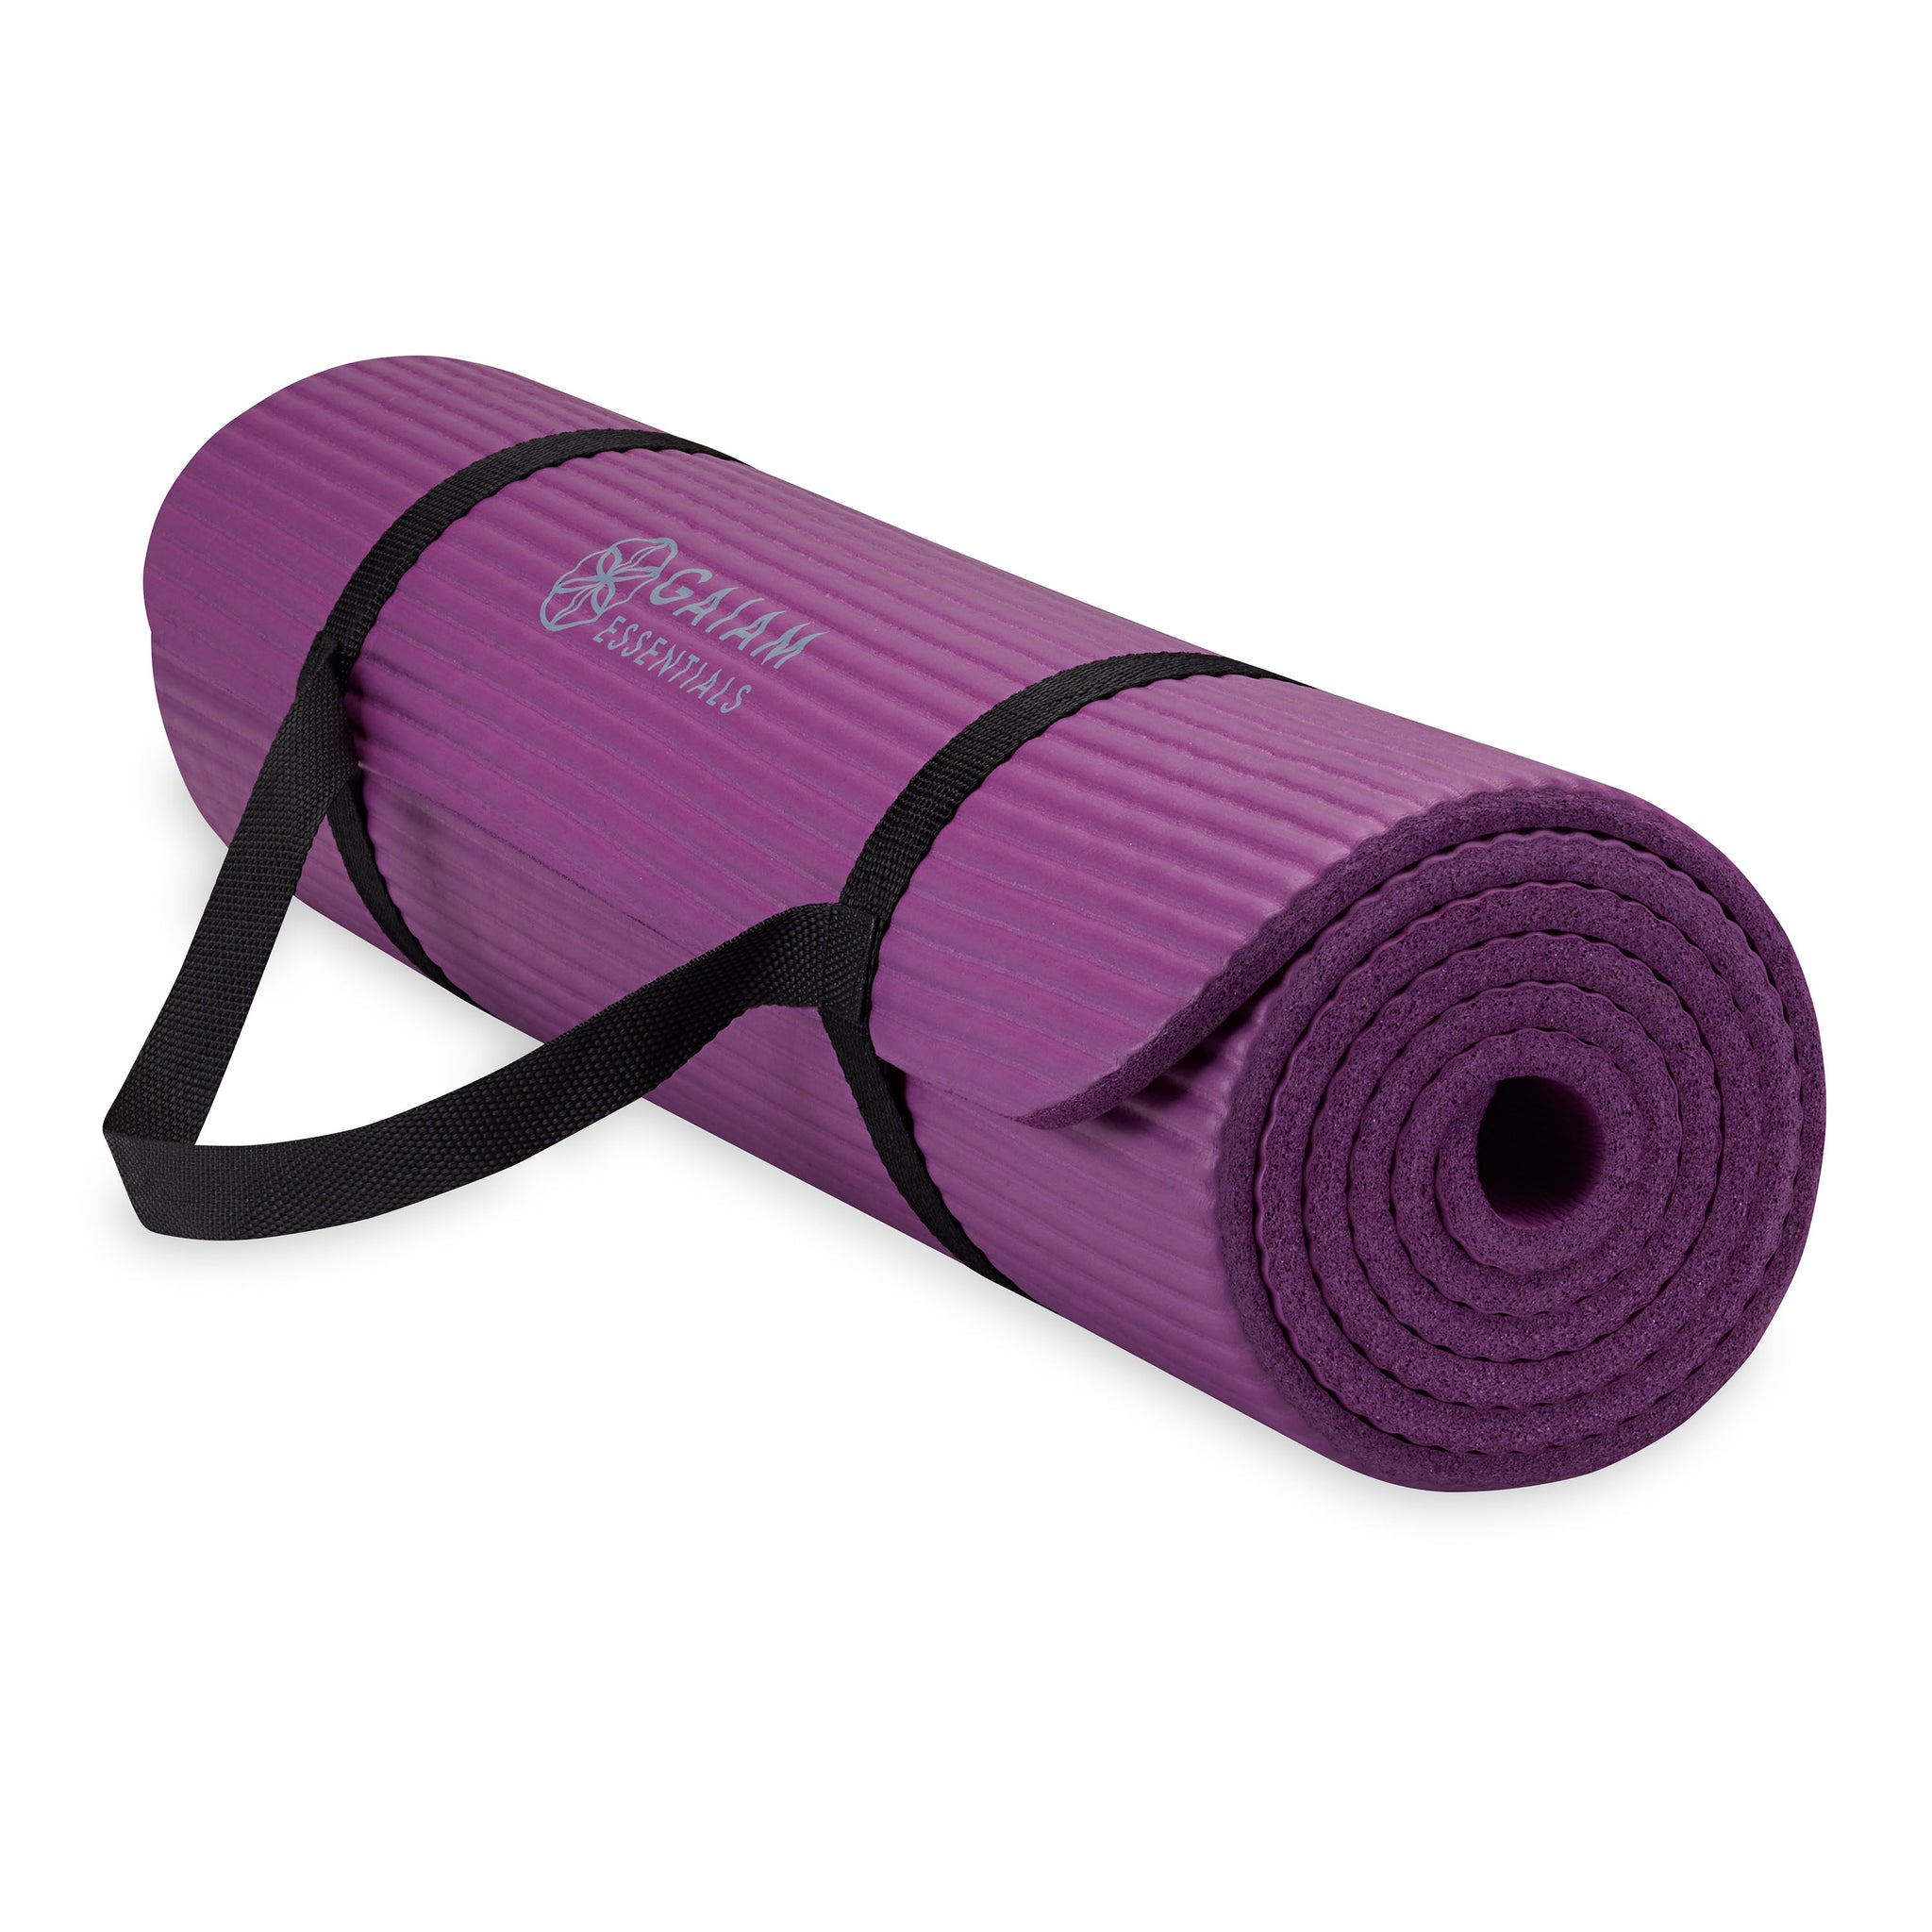 Gaiam Essentials Thick Yoga Mat Fitness & Exercise Mat with Easy-Cinch Yoga  Mat Carrier Strap, Red, 72 InchL x 24 InchW x 2/5 Inch Thick